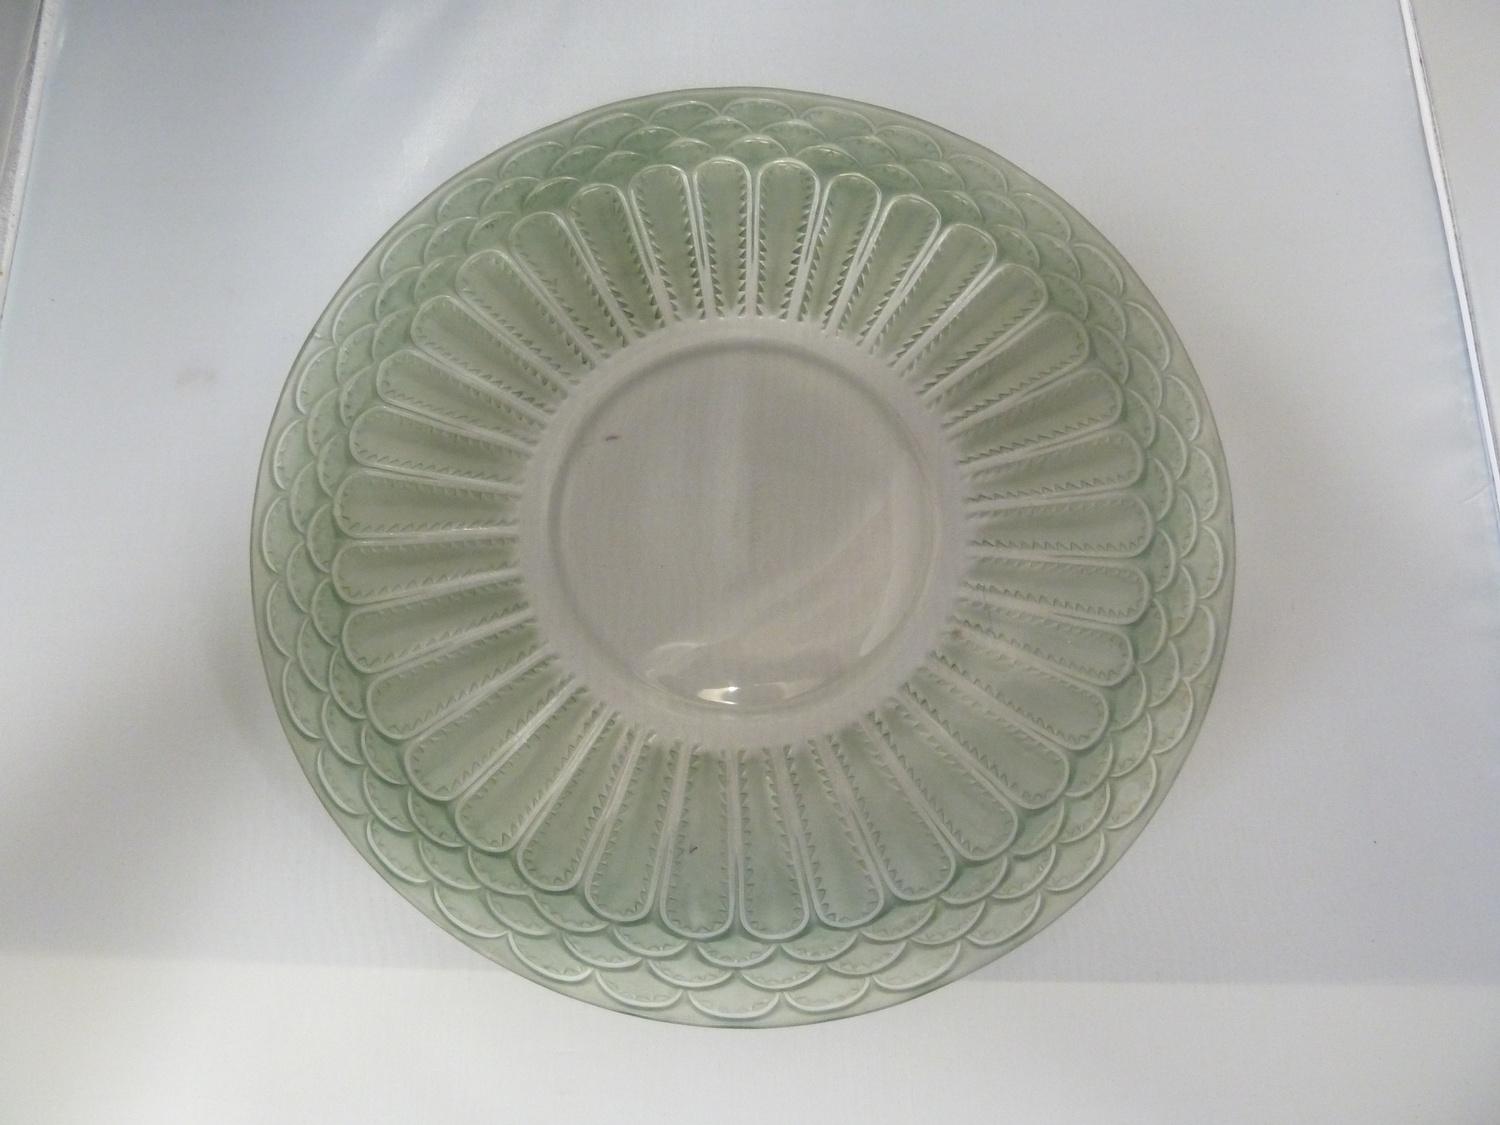 Rene Lalique - a Jaffa pattern charger, green patination, Model No: 3051 Circa 1931, acid etched